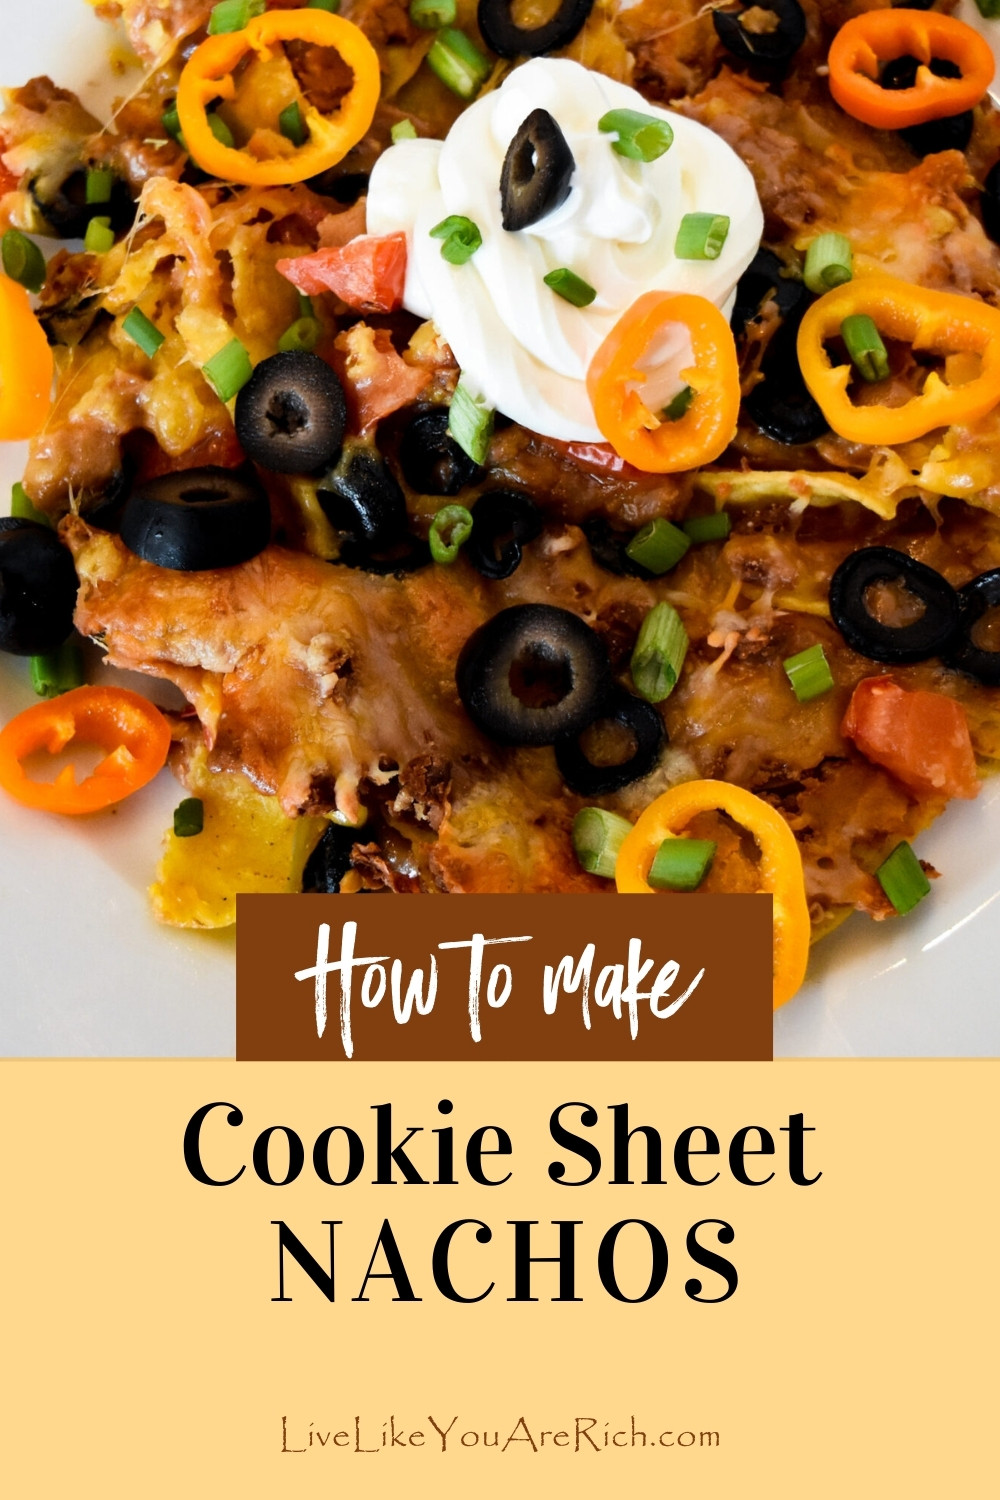 This is a cookie sheet oven baked nacho recipe that is completely customizable for friends and family.